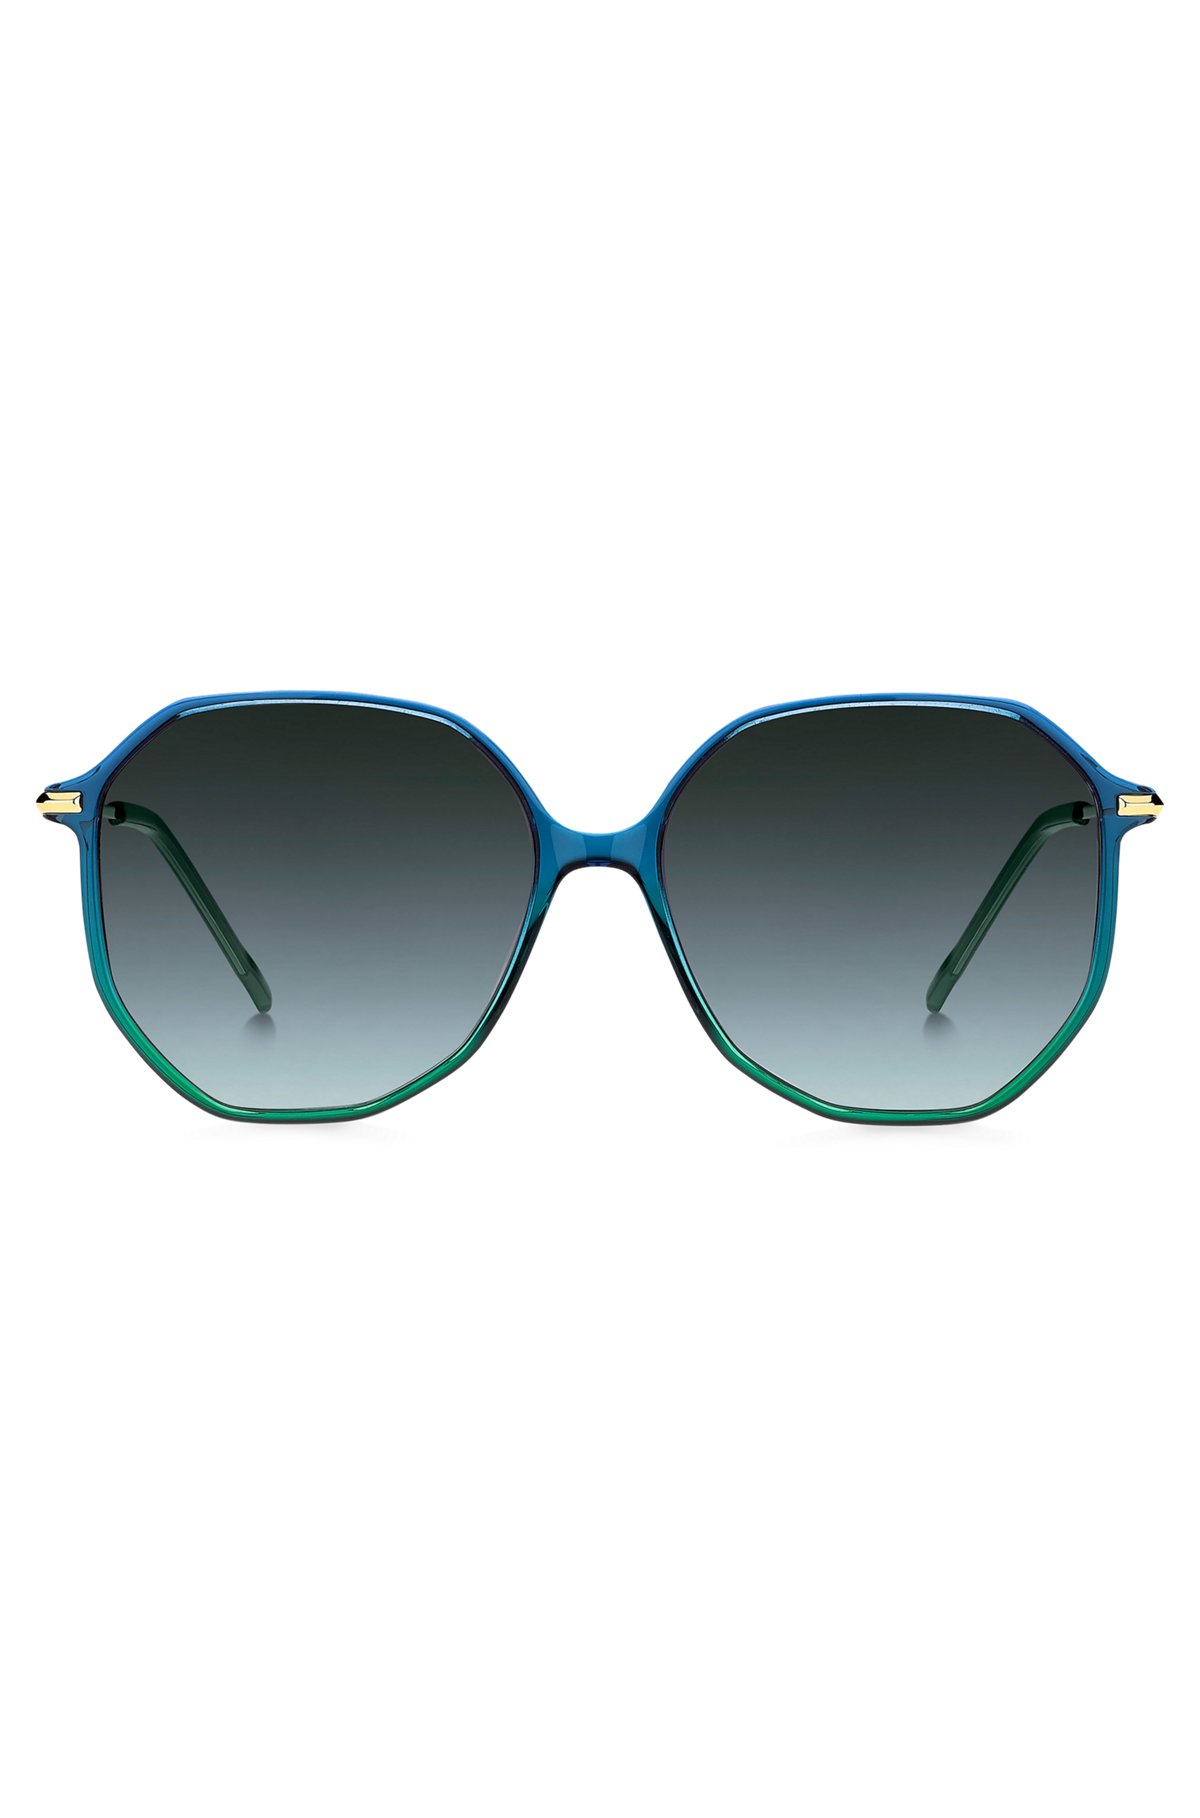 Tubular-temple sunglasses with blue-green frames, Blue Patterned